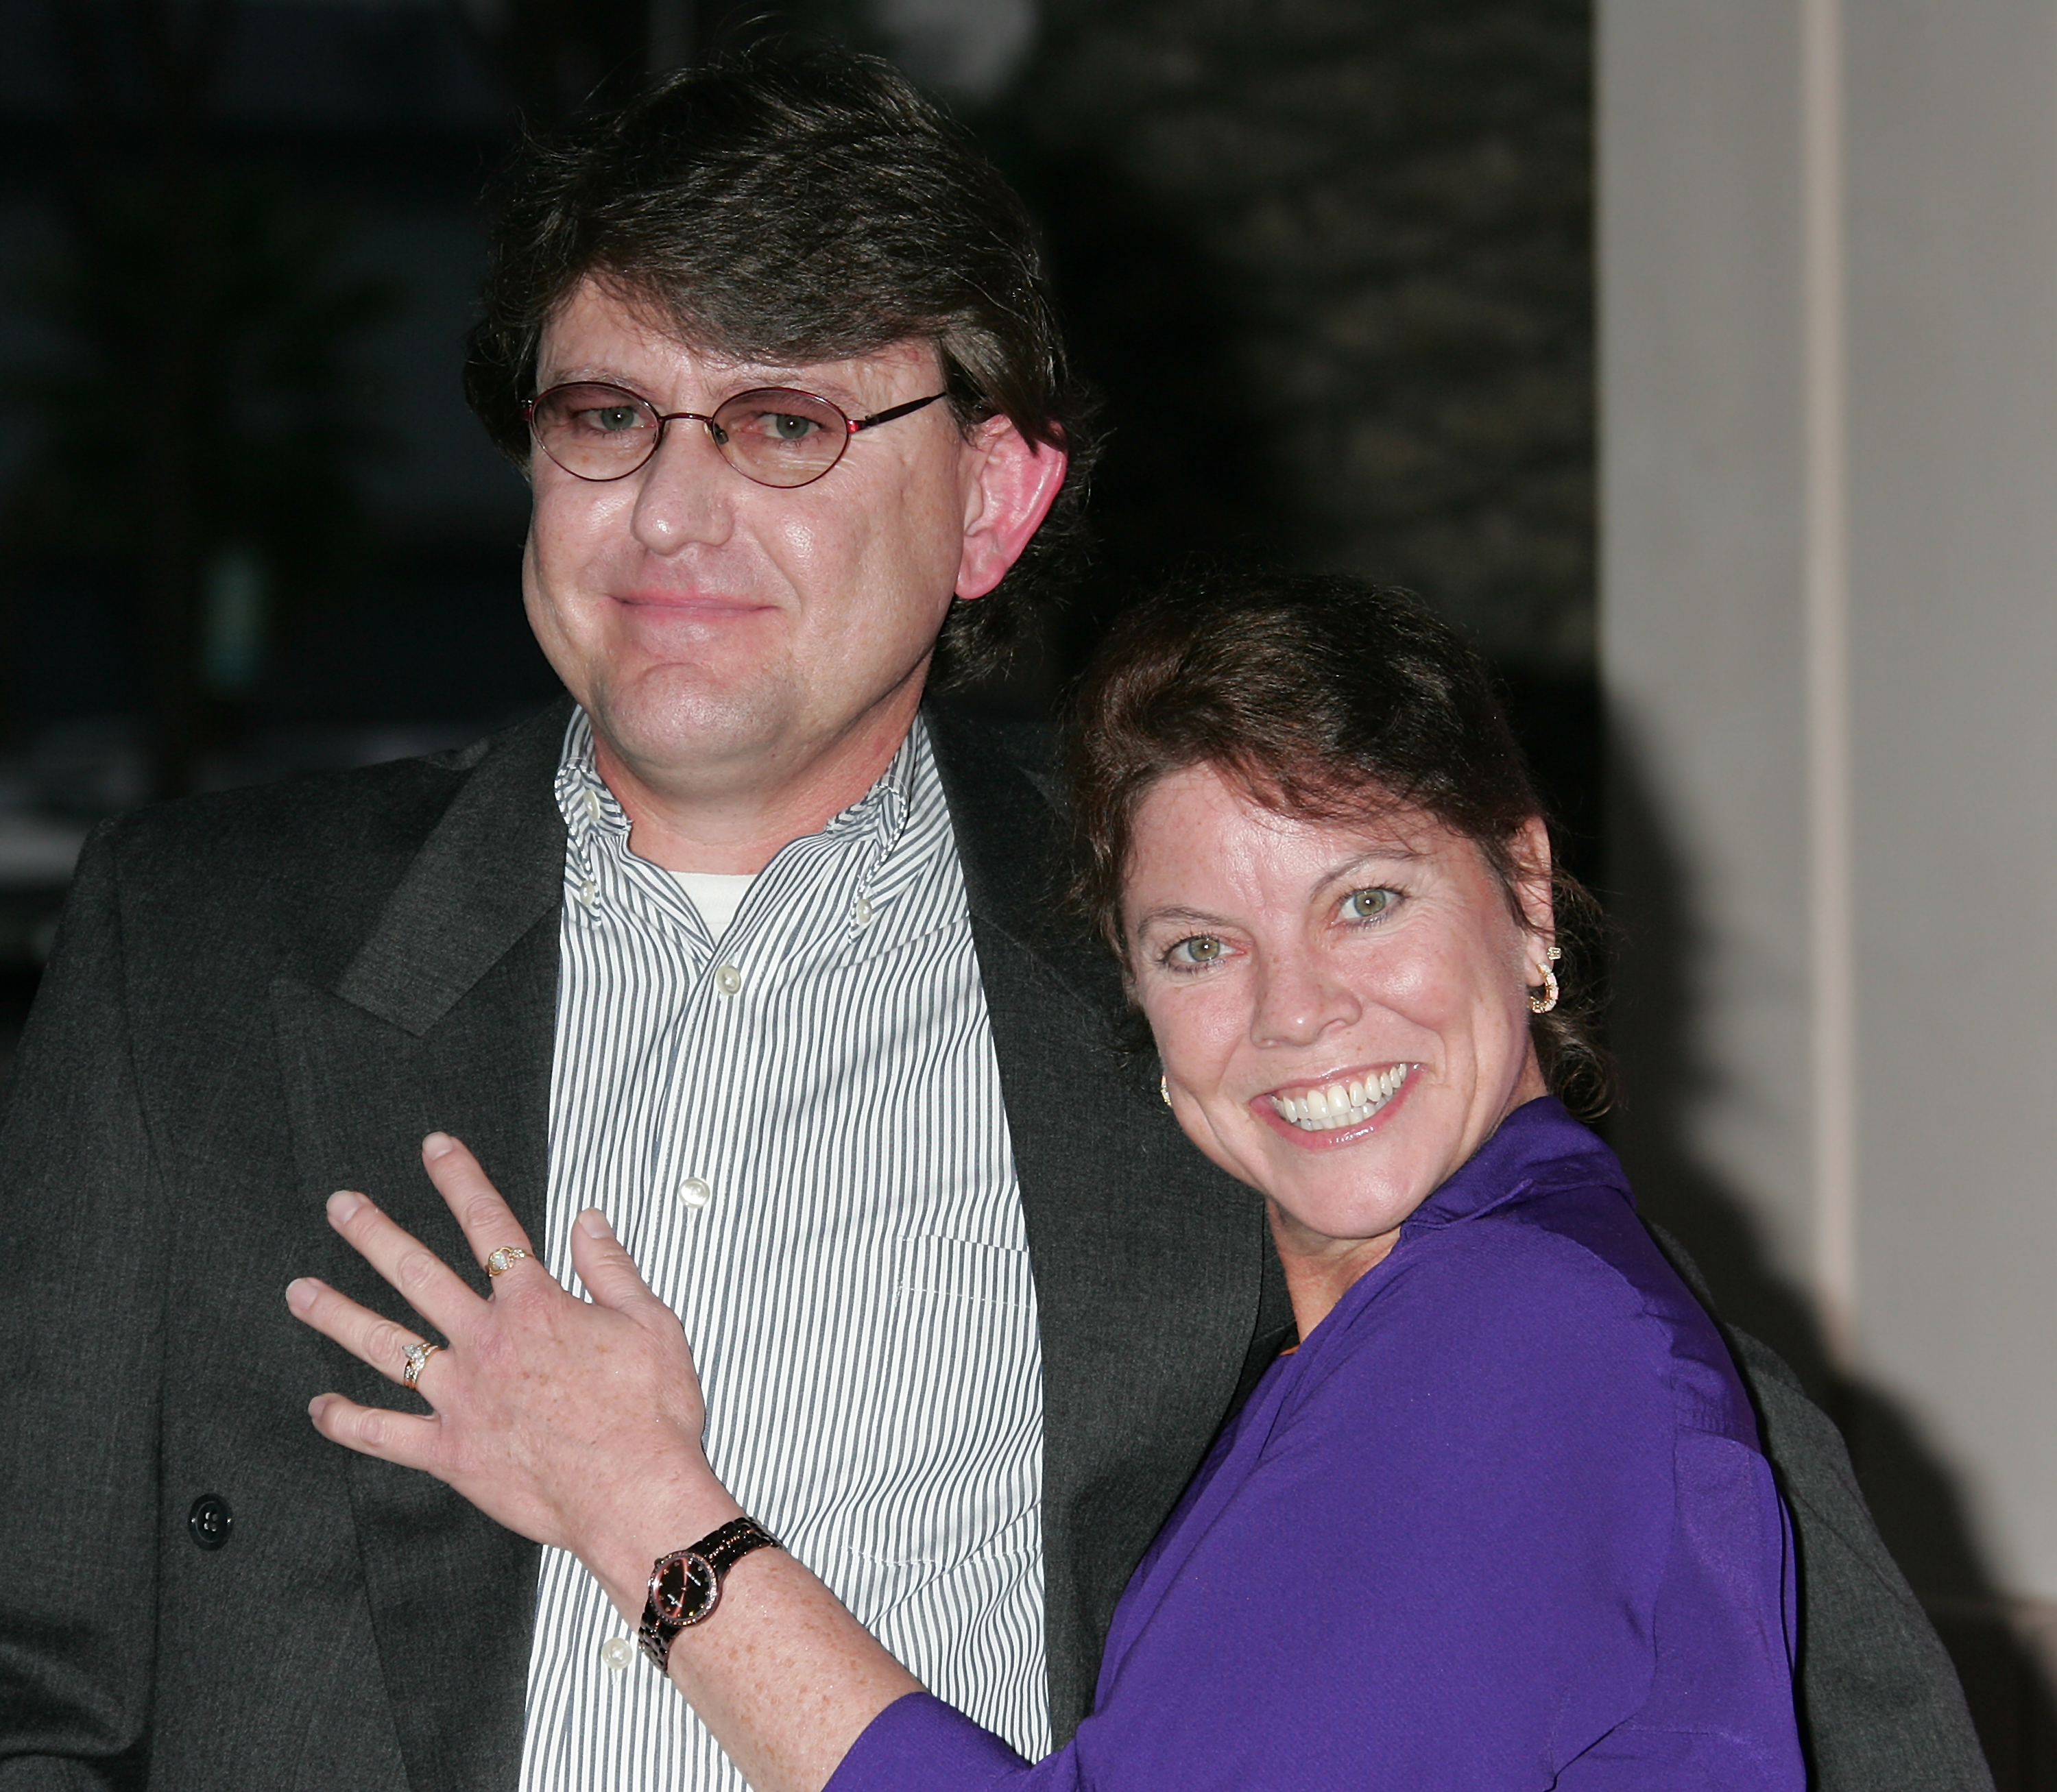 Actress Erin Moran (R) and her husband Steven Fleischmann in North Hollywood, California on May 6, 2008 | Source: Getty Images